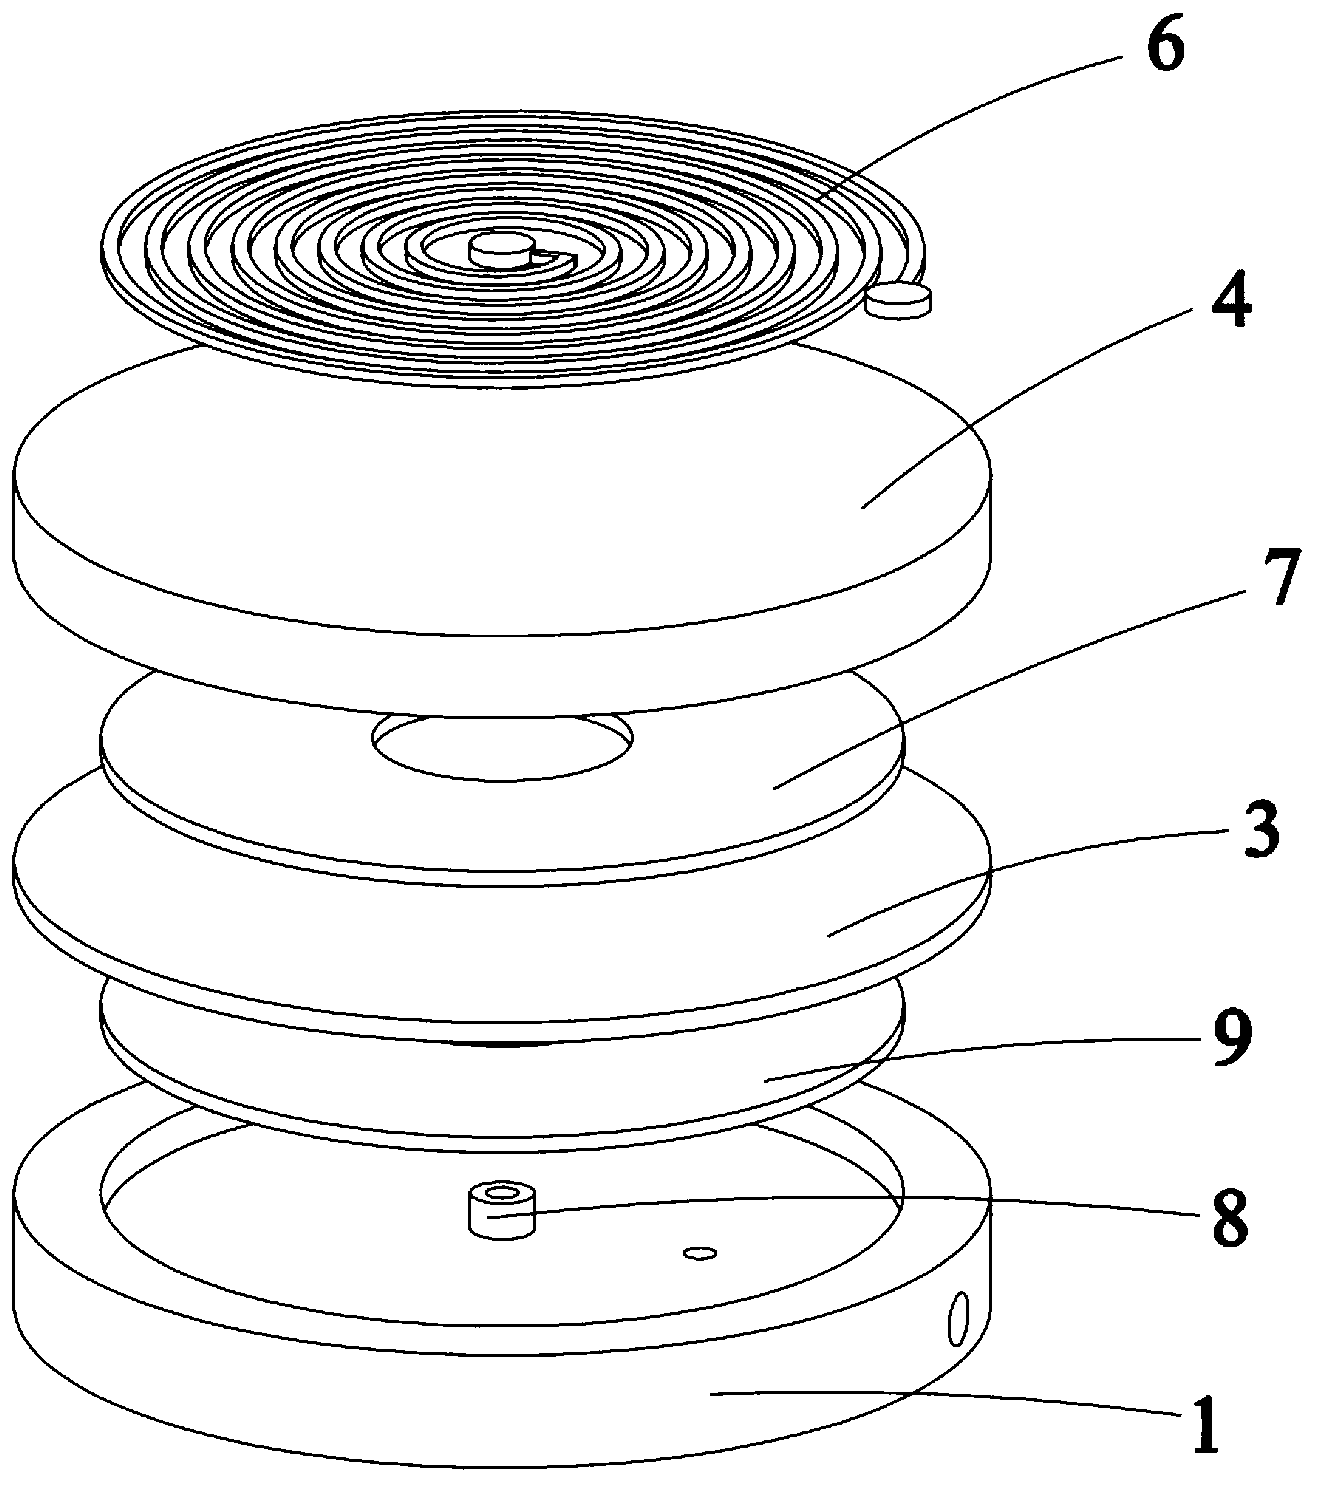 Planar coil driving-type microvalve based on super-magnetostriction film driver